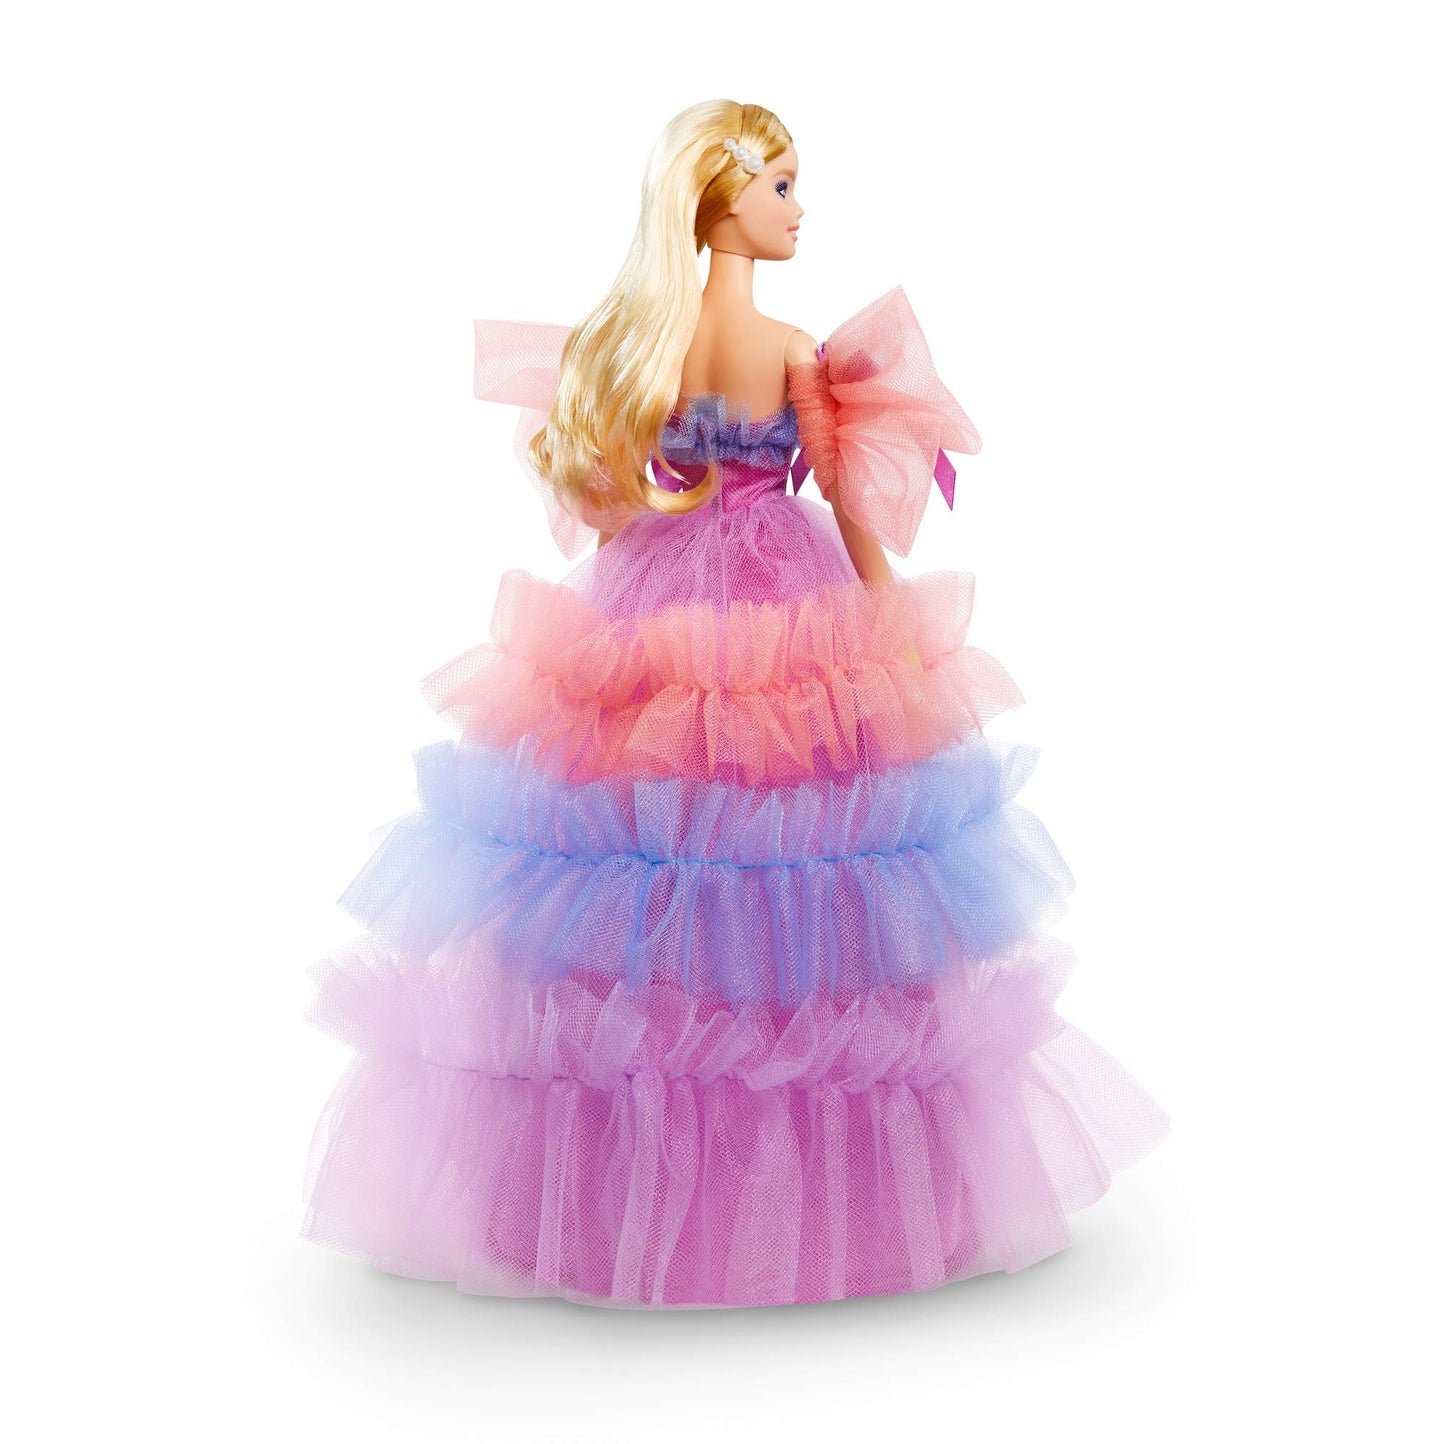 Barbie Birthday Wishes Doll (Blonde, 13-inch), Wearing Ruffled Gown, with Doll Stand and Certificate of Authenticity, Gift for 6 Year Olds and Up